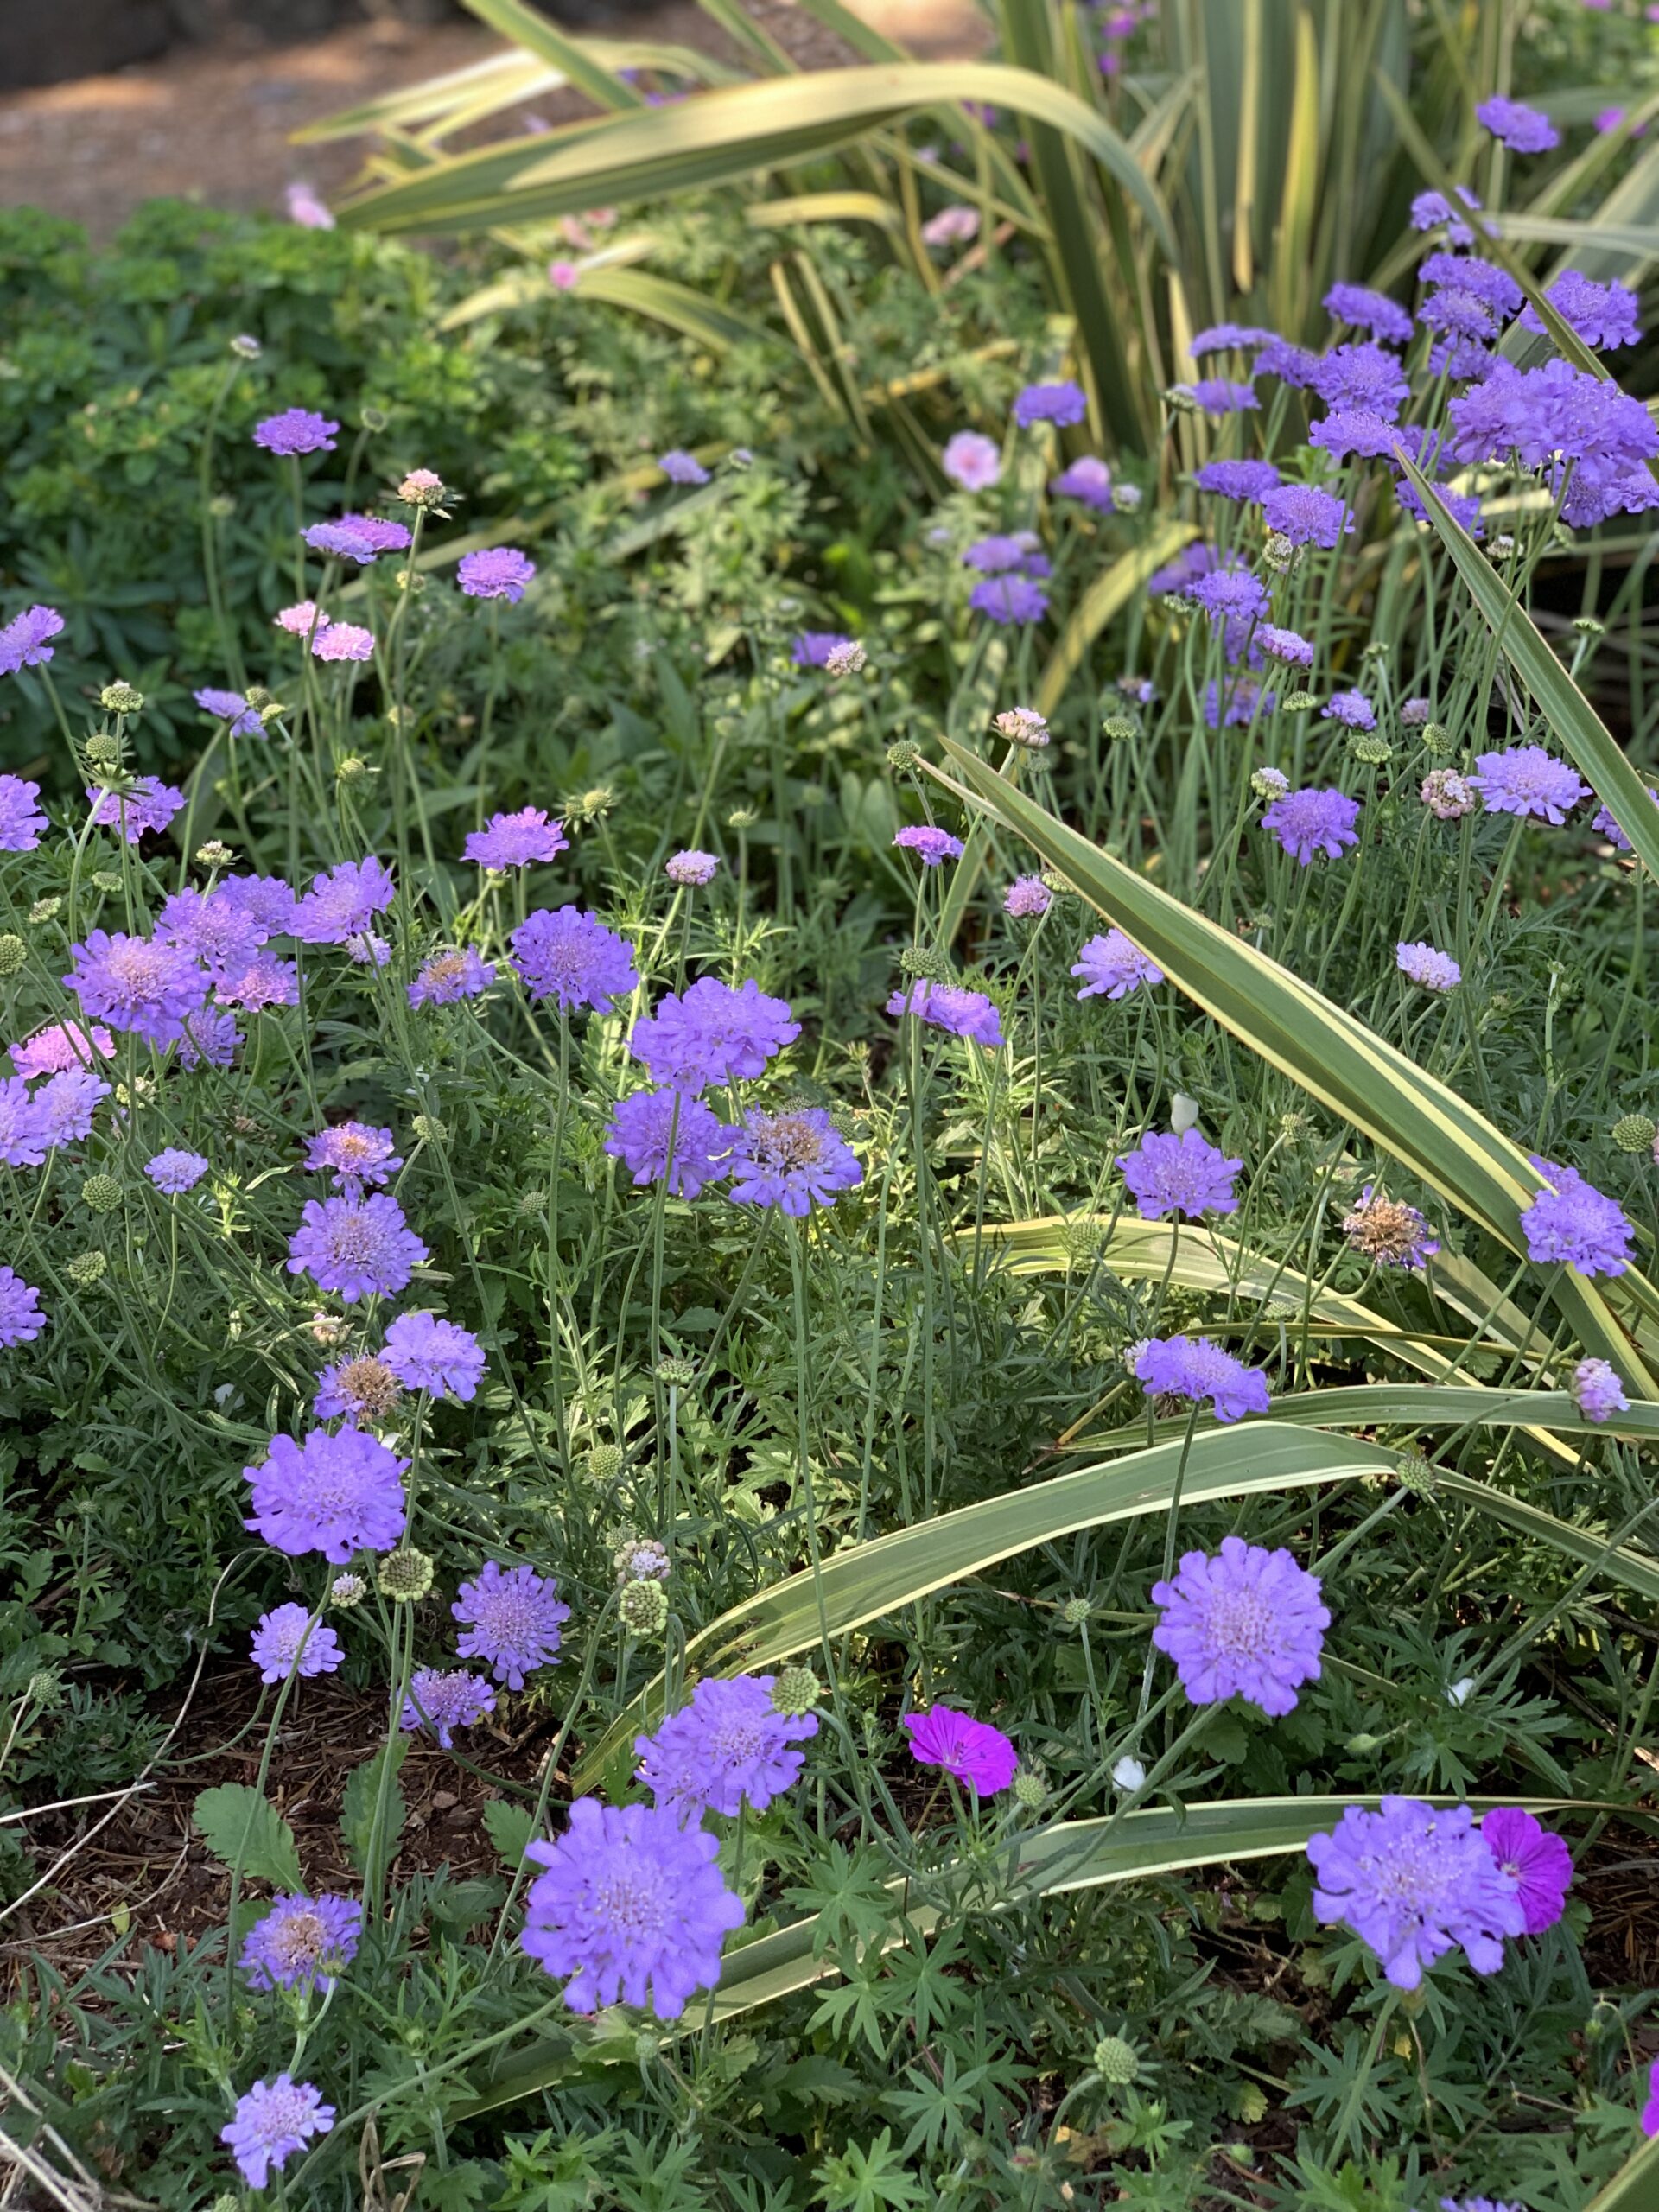 Scabiosa in the Discovery Garden, photo by Geoff Puryear